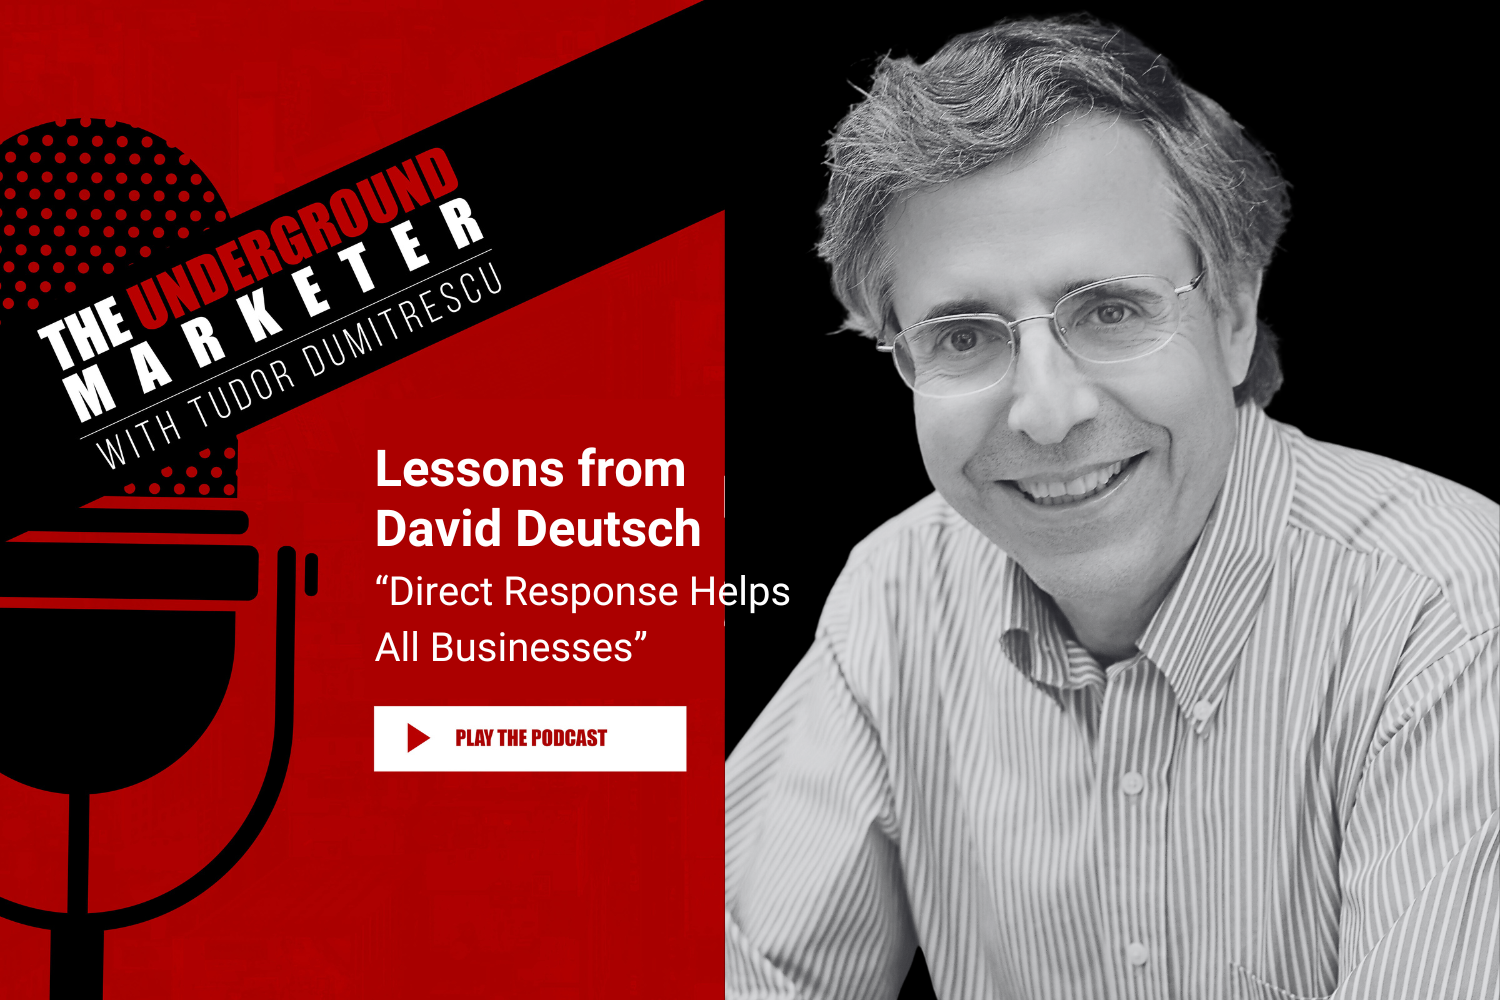 Podcast Episode 36 from the Underground Marketer Podcast: Lessons from David Deutsch